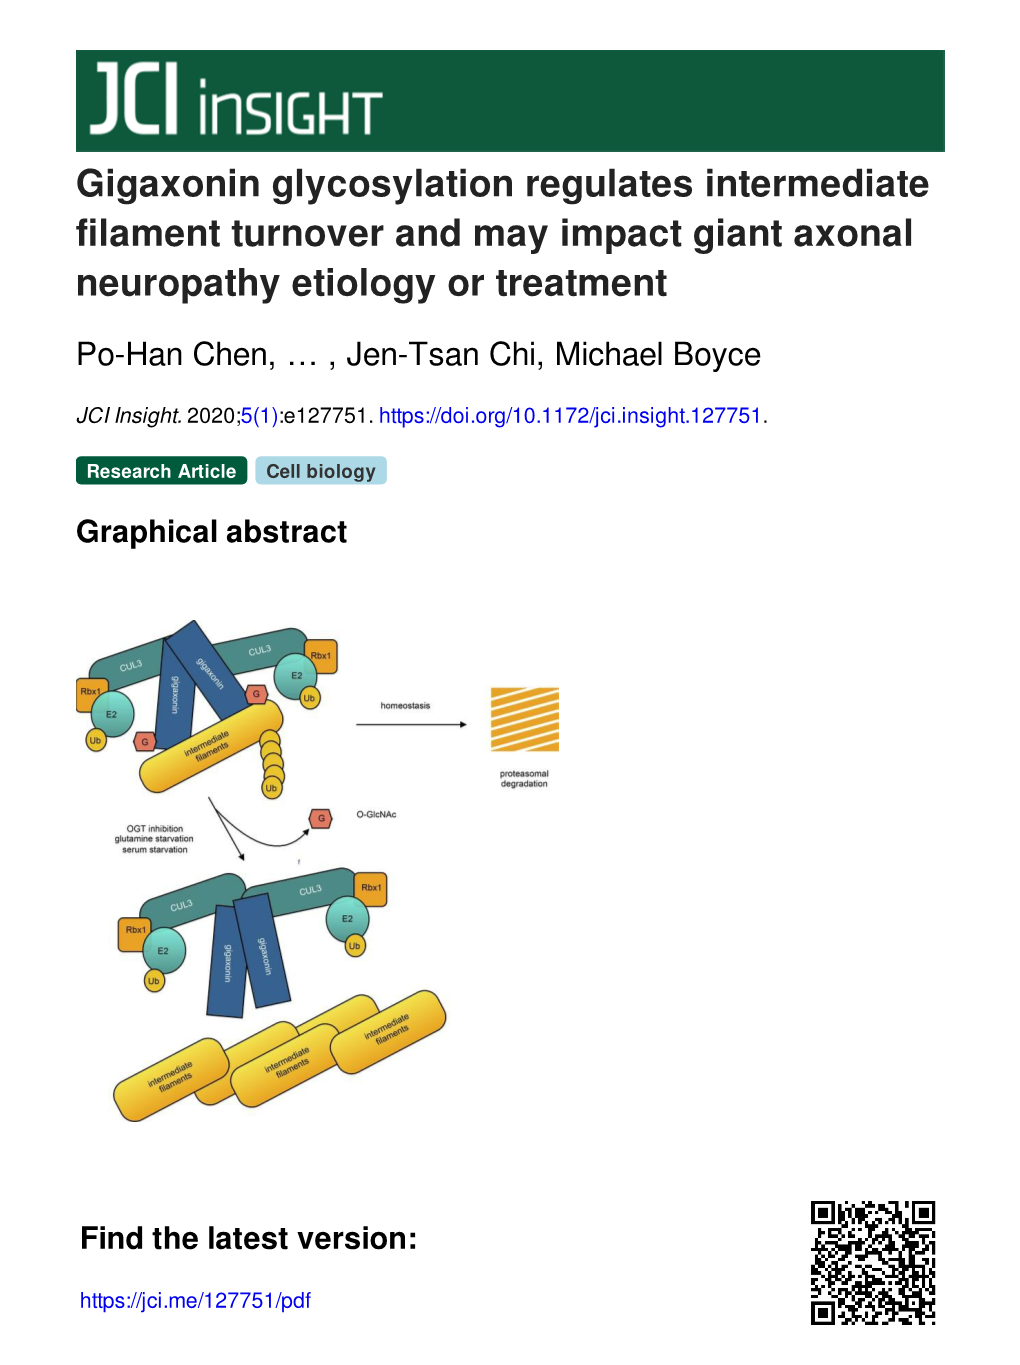 Gigaxonin Glycosylation Regulates Intermediate Filament Turnover and May Impact Giant Axonal Neuropathy Etiology Or Treatment